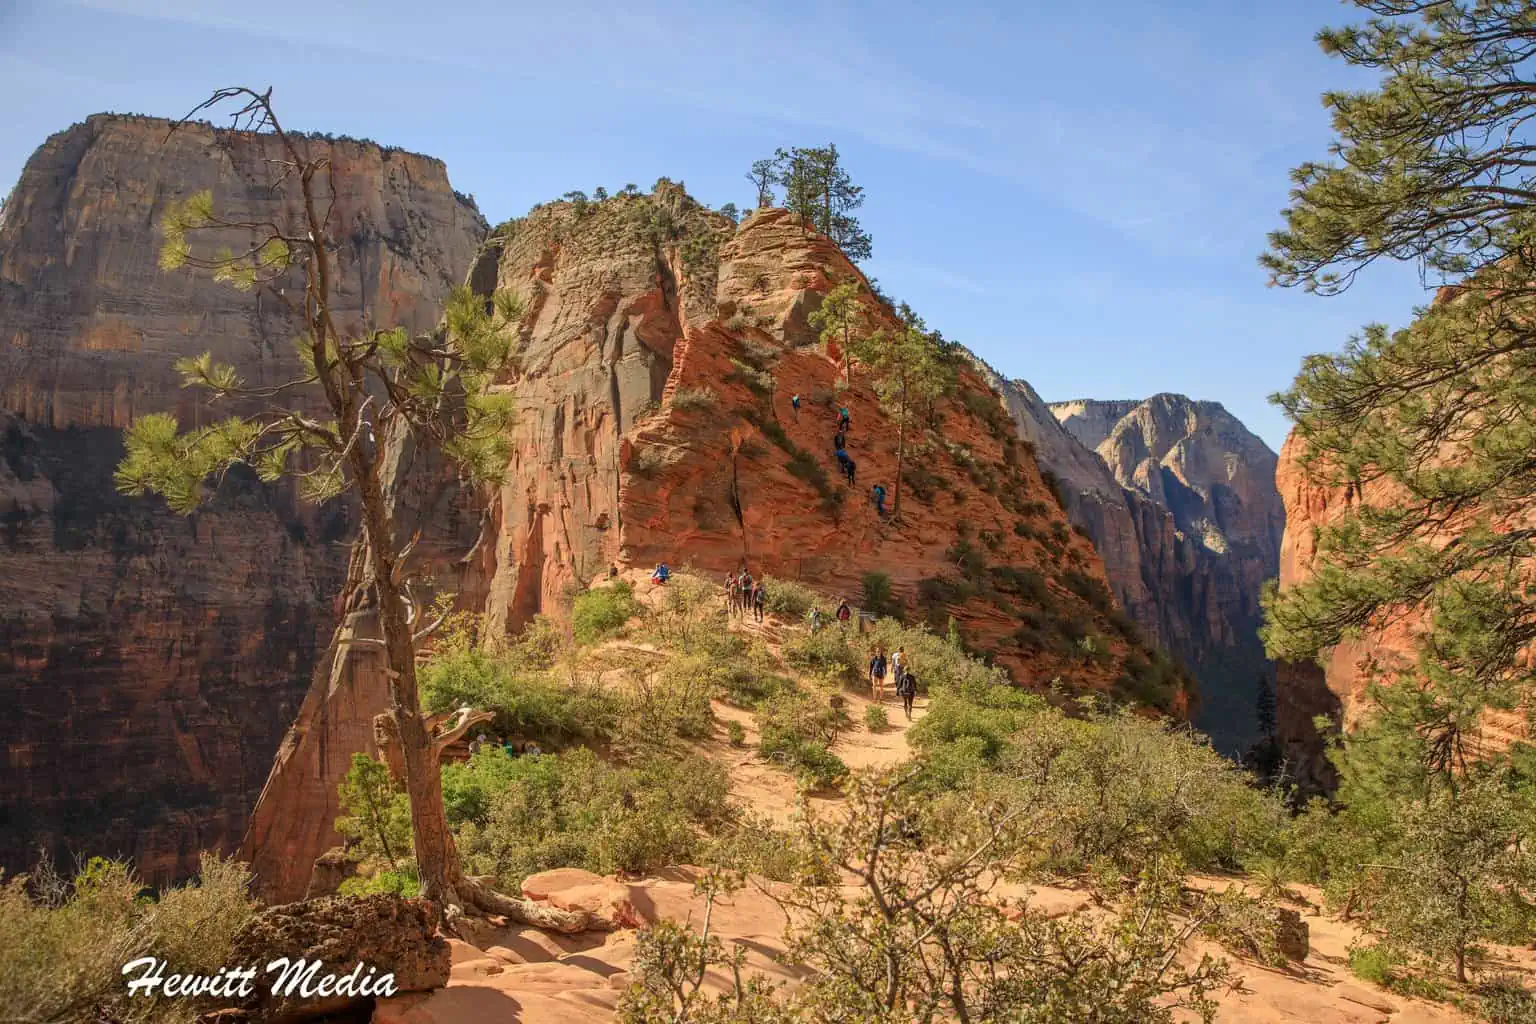 National Park Viewpoints - Angel's Landing